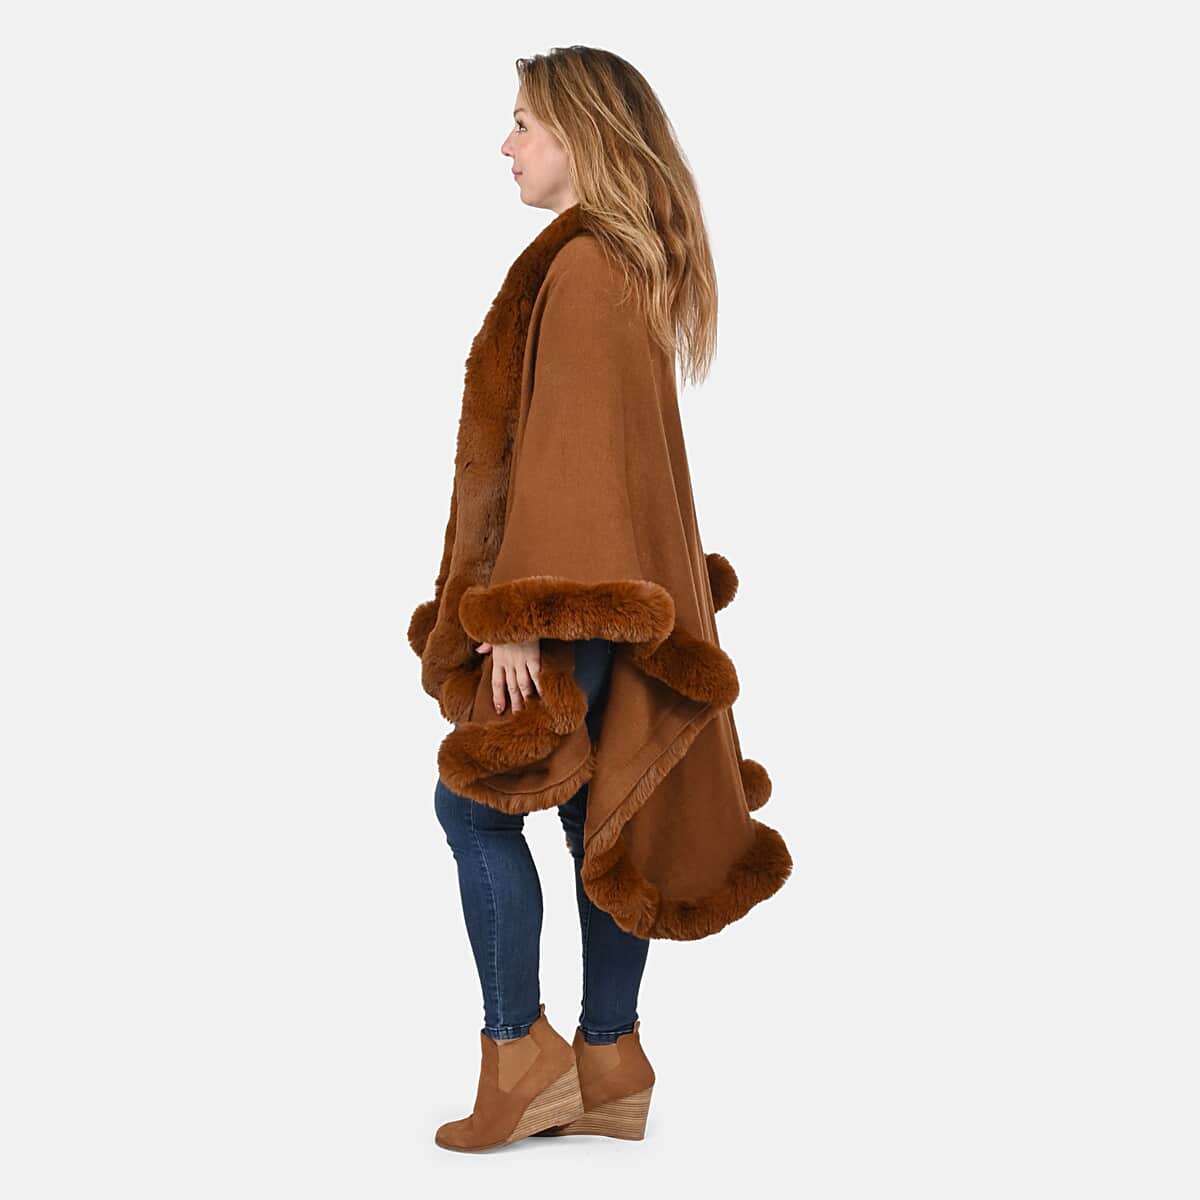 Tamsy Cognac Ruana with Faux Fur Trim - One Size Fits Most image number 2